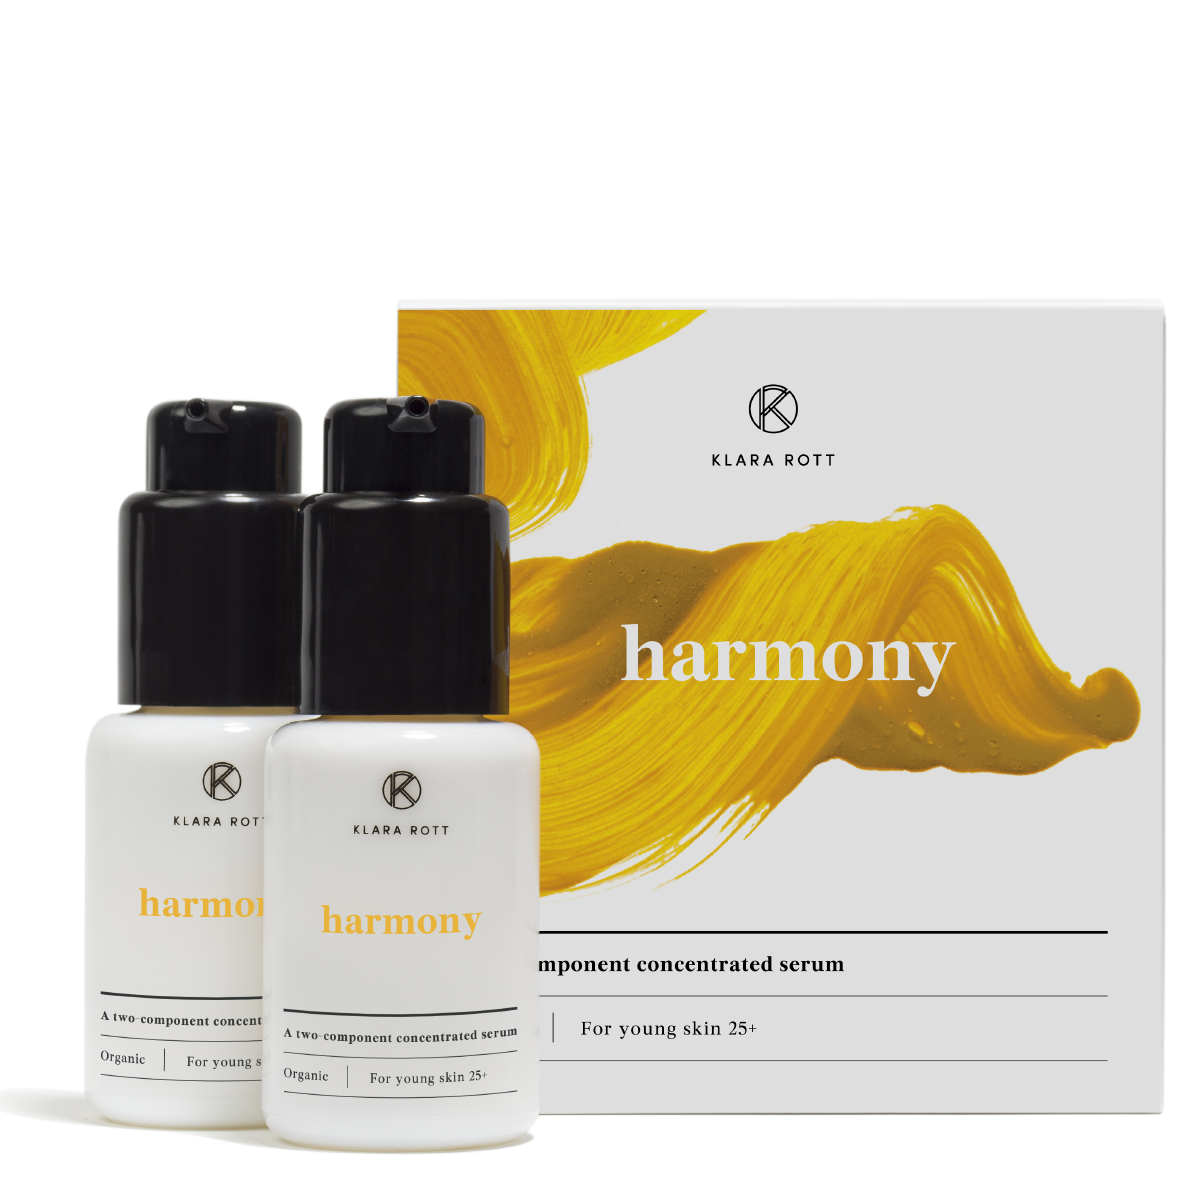 Harmony - Two-component concentrated serum for young skin 